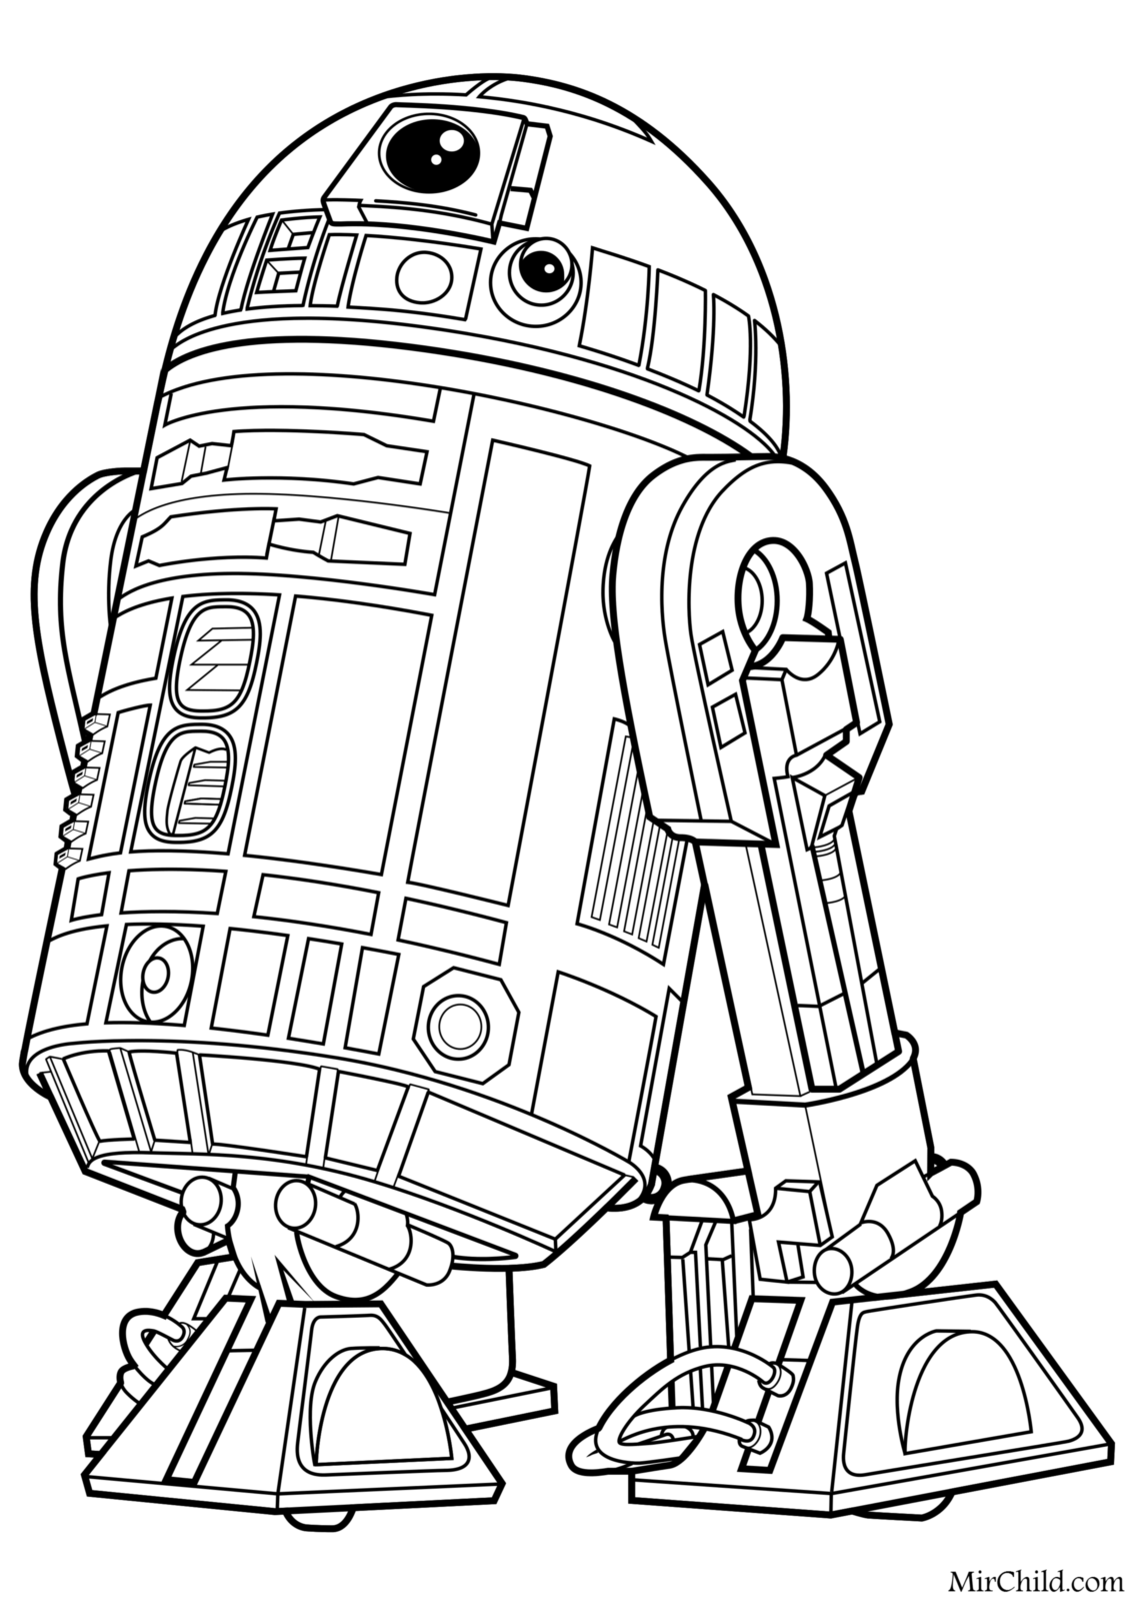 Star Wars Coloring pages 🖌 to print and color